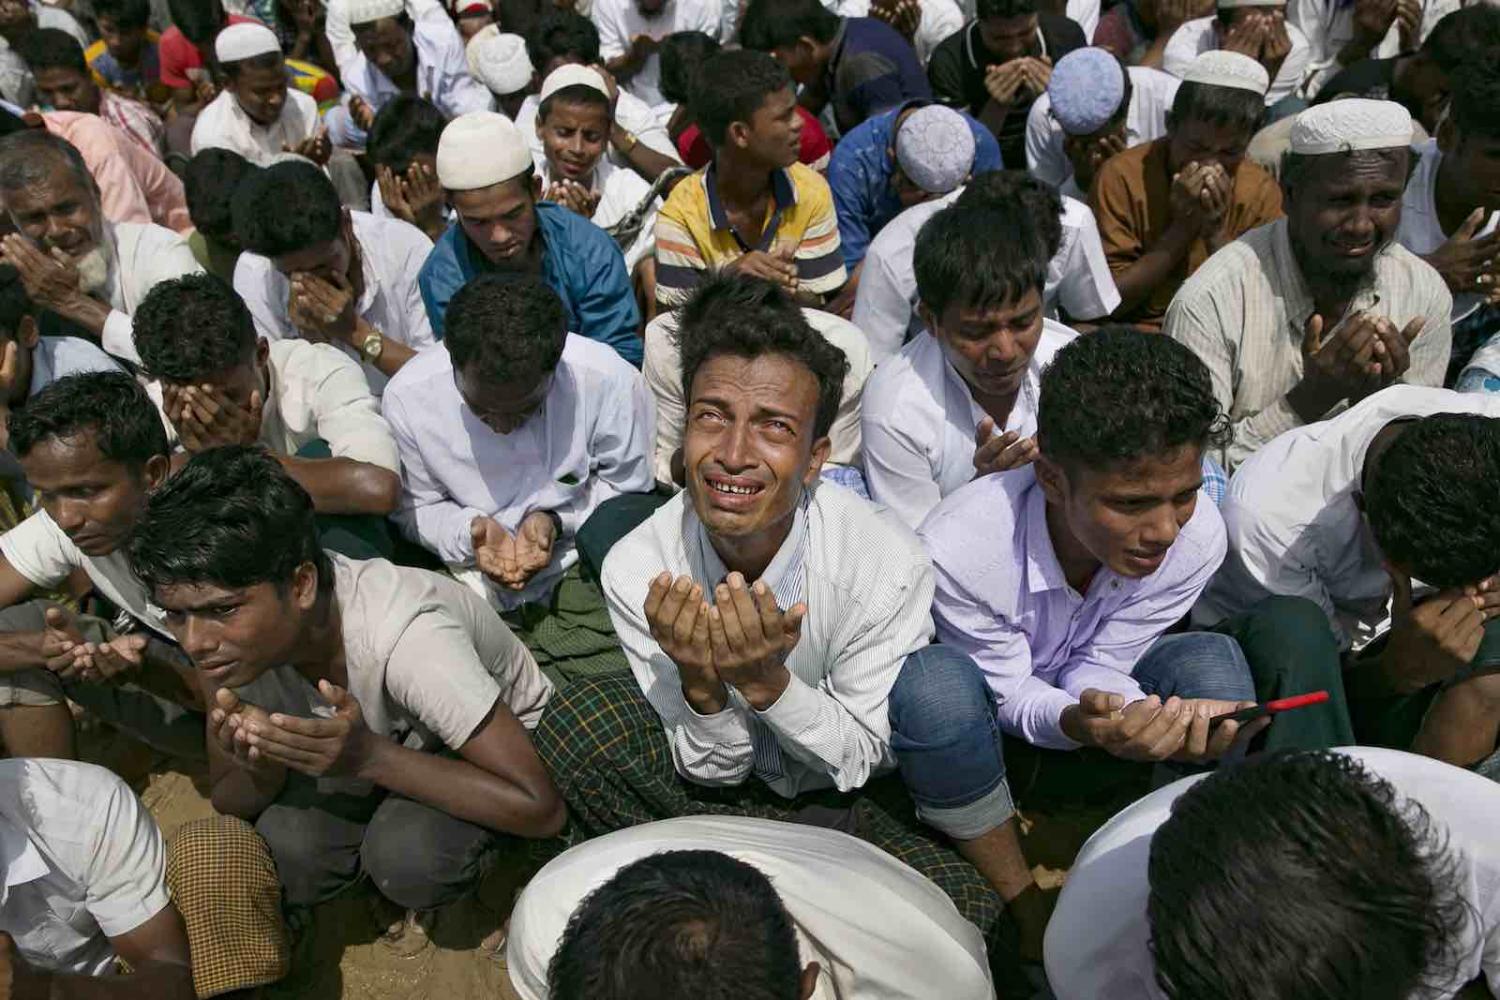 Refugees at a ceremony on the second anniversary of the Rohingya crisis, Cox’s Bazar, Bangladesh, 25 August 2019 (Photo: Allison Joyce/Getty Images)